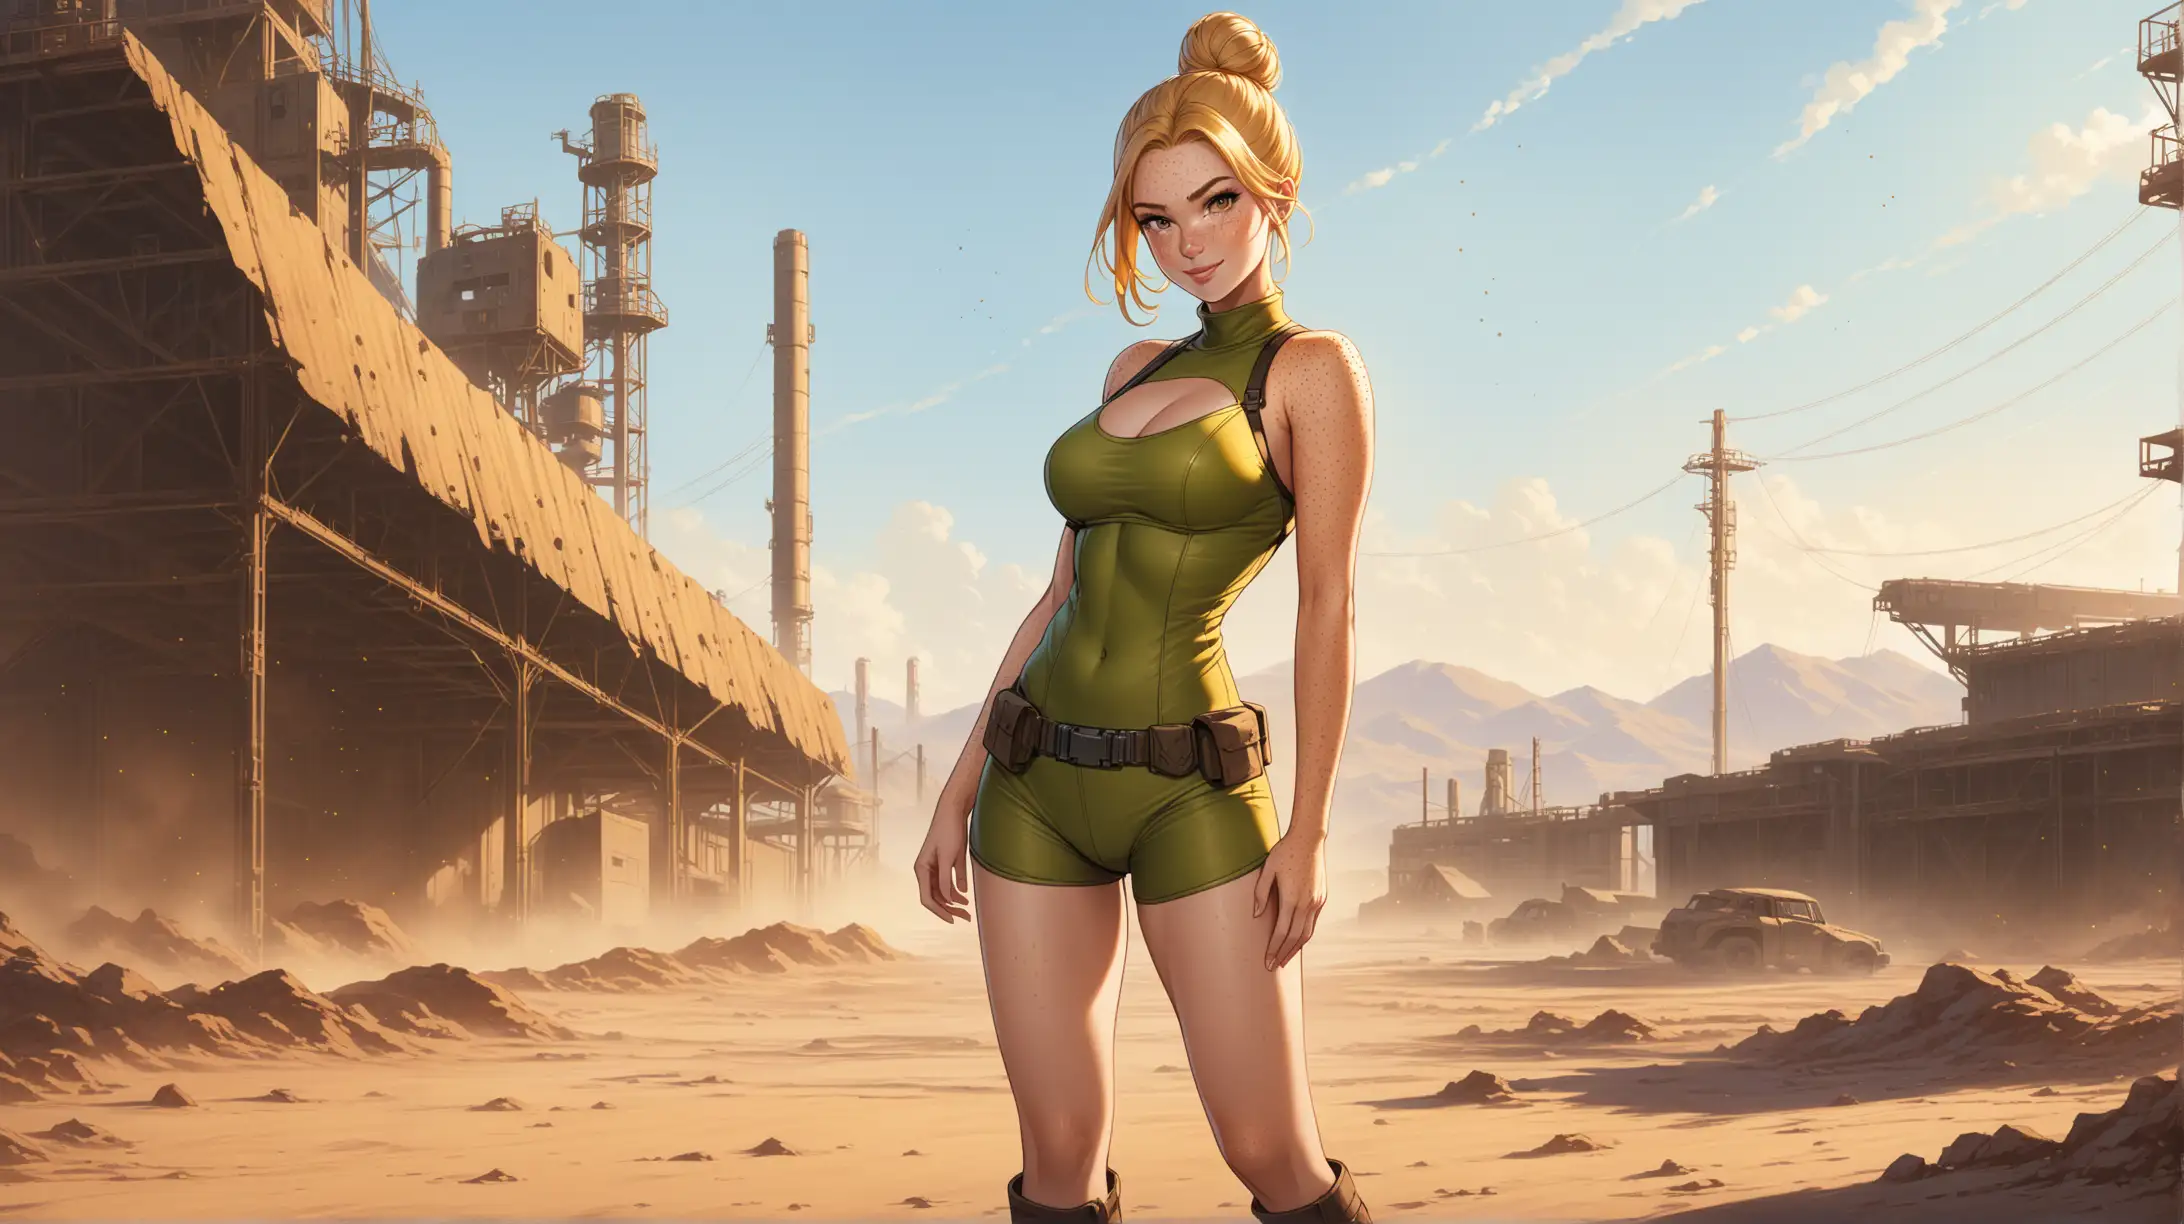 Draw a woman, long blonde hair in a bun, gold eyes, freckles, perky figure, outfit inspired from the Fallout series, high quality, long shot, outdoors, seductive pose, natural lighting, smiling at the viewer